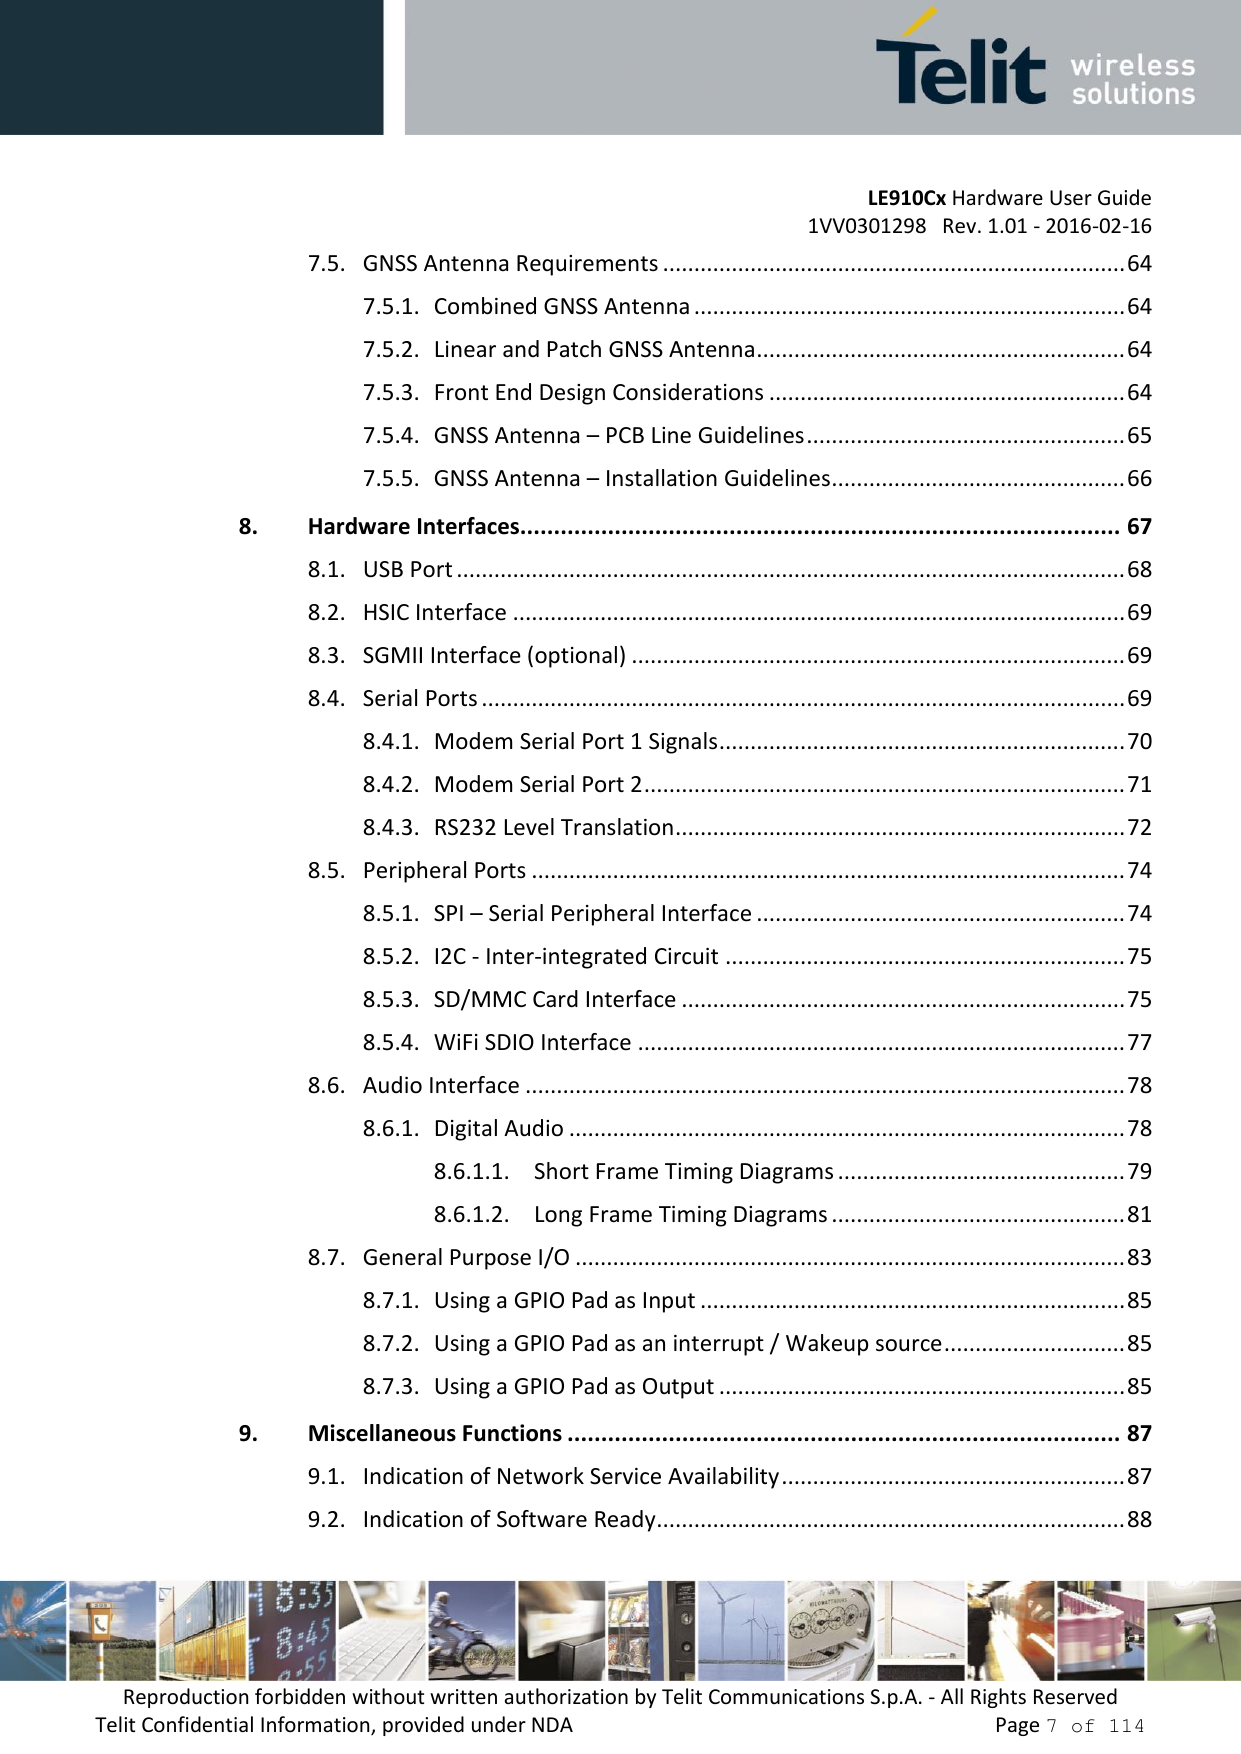         LE910Cx Hardware User Guide     1VV0301298   Rev. 1.01 - 2016-02-16 Reproduction forbidden without written authorization by Telit Communications S.p.A. - All Rights Reserved Telit Confidential Information, provided under NDA                 Page 7 of 114 7.5. GNSS Antenna Requirements .......................................................................... 64 7.5.1. Combined GNSS Antenna ..................................................................... 64 7.5.2. Linear and Patch GNSS Antenna ........................................................... 64 7.5.3. Front End Design Considerations ......................................................... 64 7.5.4. GNSS Antenna – PCB Line Guidelines ................................................... 65 7.5.5. GNSS Antenna – Installation Guidelines ............................................... 66 8. Hardware Interfaces......................................................................................... 67 8.1. USB Port ........................................................................................................... 68 8.2. HSIC Interface .................................................................................................. 69 8.3. SGMII Interface (optional) ............................................................................... 69 8.4. Serial Ports ....................................................................................................... 69 8.4.1. Modem Serial Port 1 Signals ................................................................. 70 8.4.2. Modem Serial Port 2 ............................................................................. 71 8.4.3. RS232 Level Translation ........................................................................ 72 8.5. Peripheral Ports ............................................................................................... 74 8.5.1. SPI – Serial Peripheral Interface ........................................................... 74 8.5.2. I2C - Inter-integrated Circuit ................................................................ 75 8.5.3. SD/MMC Card Interface ....................................................................... 75 8.5.4. WiFi SDIO Interface .............................................................................. 77 8.6. Audio Interface ................................................................................................ 78 8.6.1. Digital Audio ......................................................................................... 78 8.6.1.1. Short Frame Timing Diagrams .............................................. 79 8.6.1.2. Long Frame Timing Diagrams ............................................... 81 8.7. General Purpose I/O ........................................................................................ 83 8.7.1. Using a GPIO Pad as Input .................................................................... 85 8.7.2. Using a GPIO Pad as an interrupt / Wakeup source ............................. 85 8.7.3. Using a GPIO Pad as Output ................................................................. 85 9. Miscellaneous Functions .................................................................................. 87 9.1. Indication of Network Service Availability ....................................................... 87 9.2. Indication of Software Ready ........................................................................... 88 